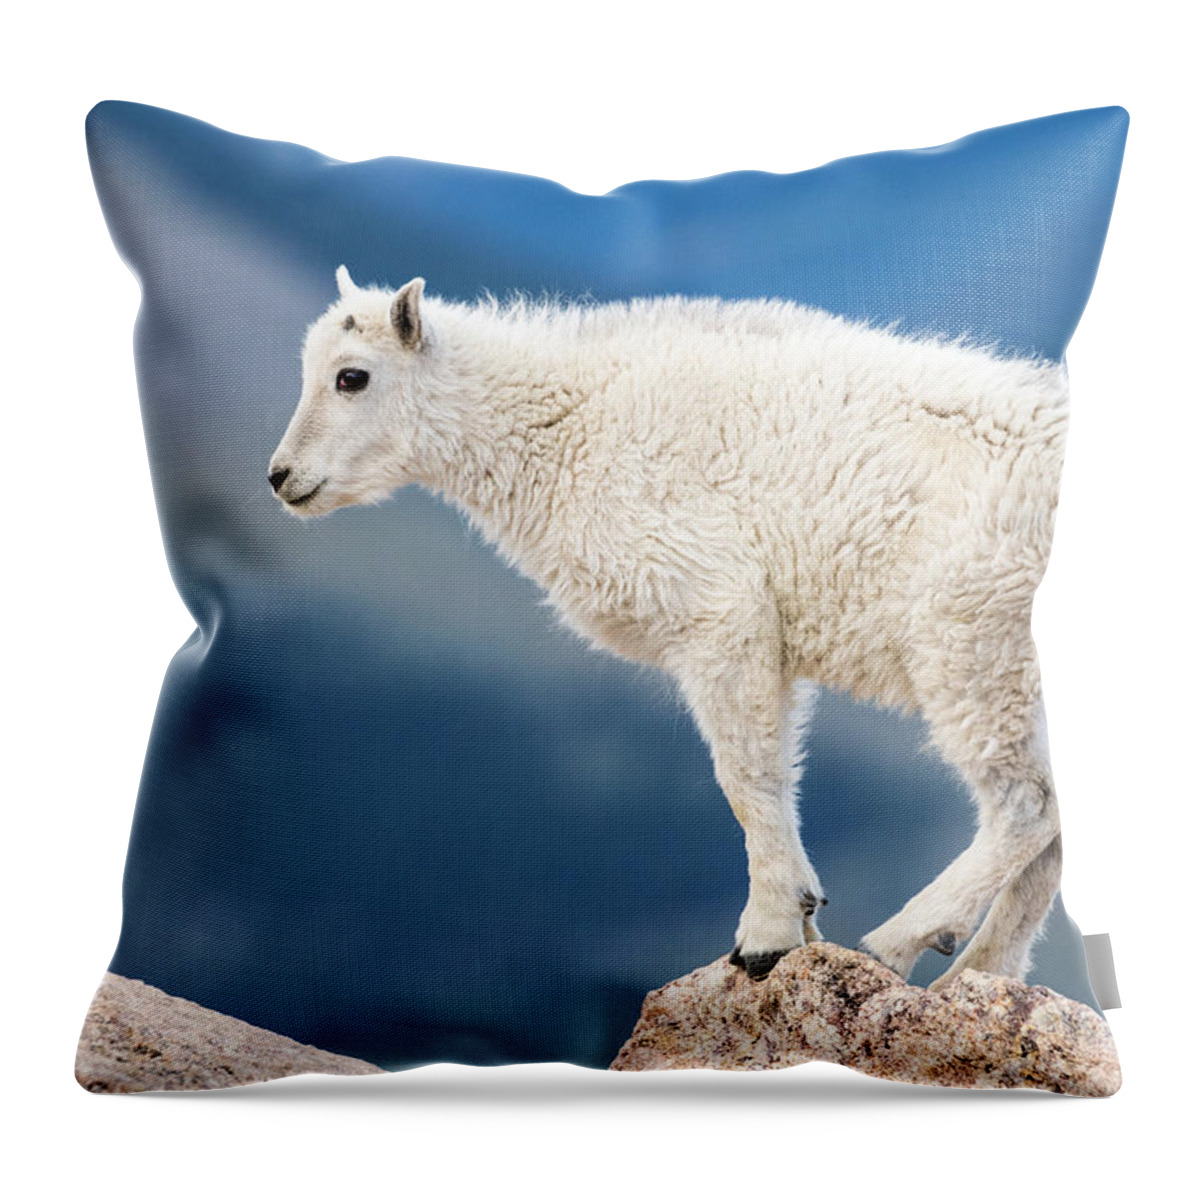 Mountain Goat Throw Pillow featuring the photograph At The Top Of The Rockies #3 by Mindy Musick King